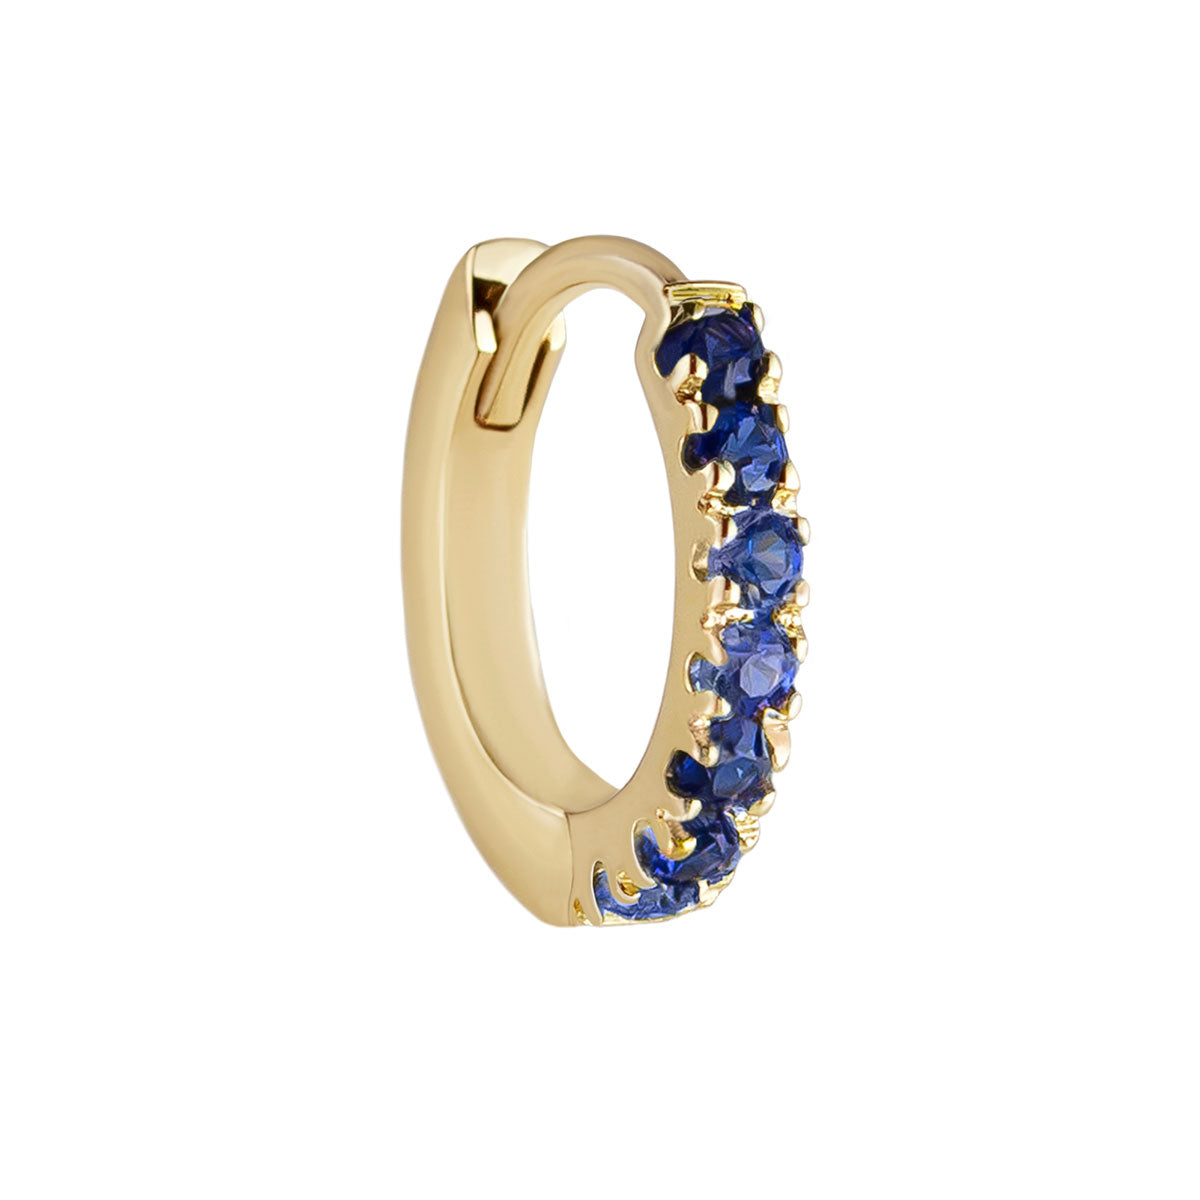 Metier by tomfoolery Original Pave Gemstone Huggies. 9ct Yellow Gold with Blue Sapphire